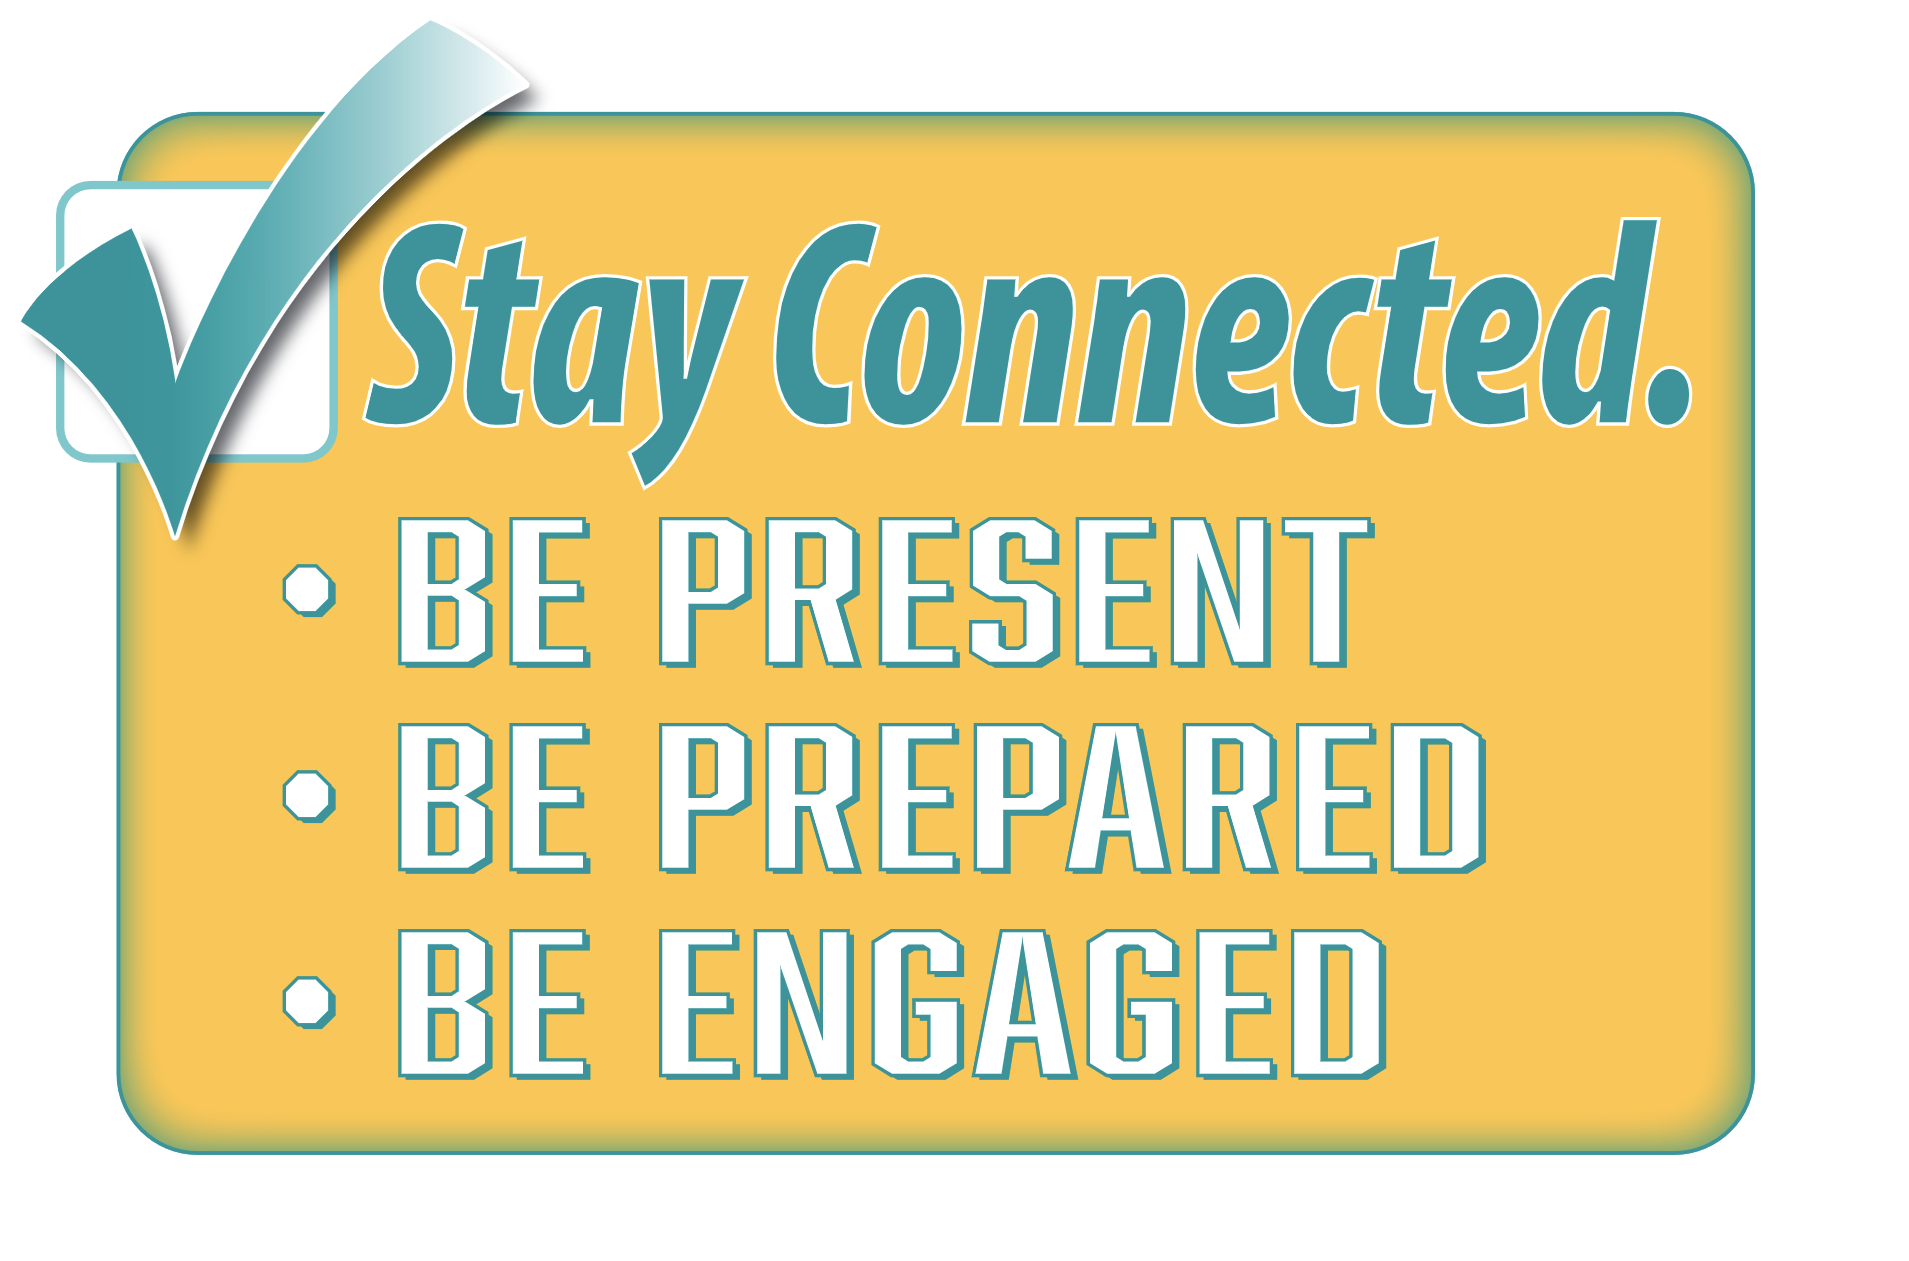 "Stay Connected. Be present. Be prepared. Be engaged."